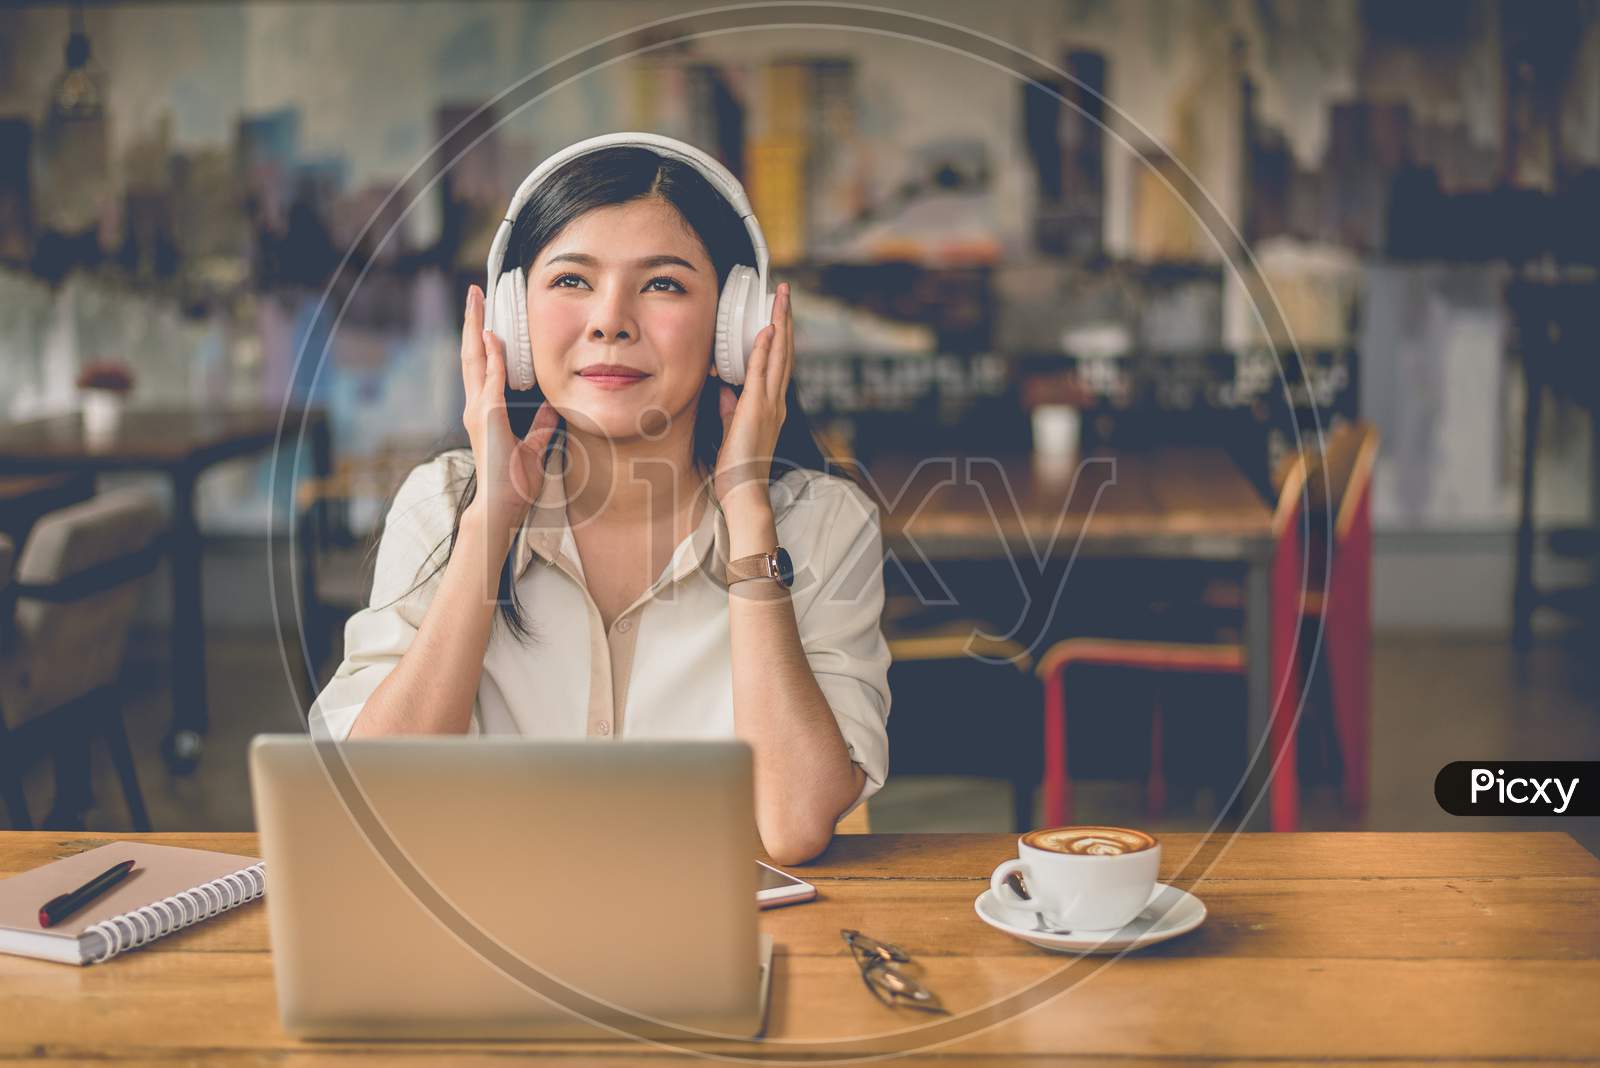 Happy Asian Woman Relaxing And Listening Music In Coffee Shop With Computer Laptop And Coffee Cup. People And Lifestyles Concept. Freelance And Outdoors Workplace Outdoors Theme.